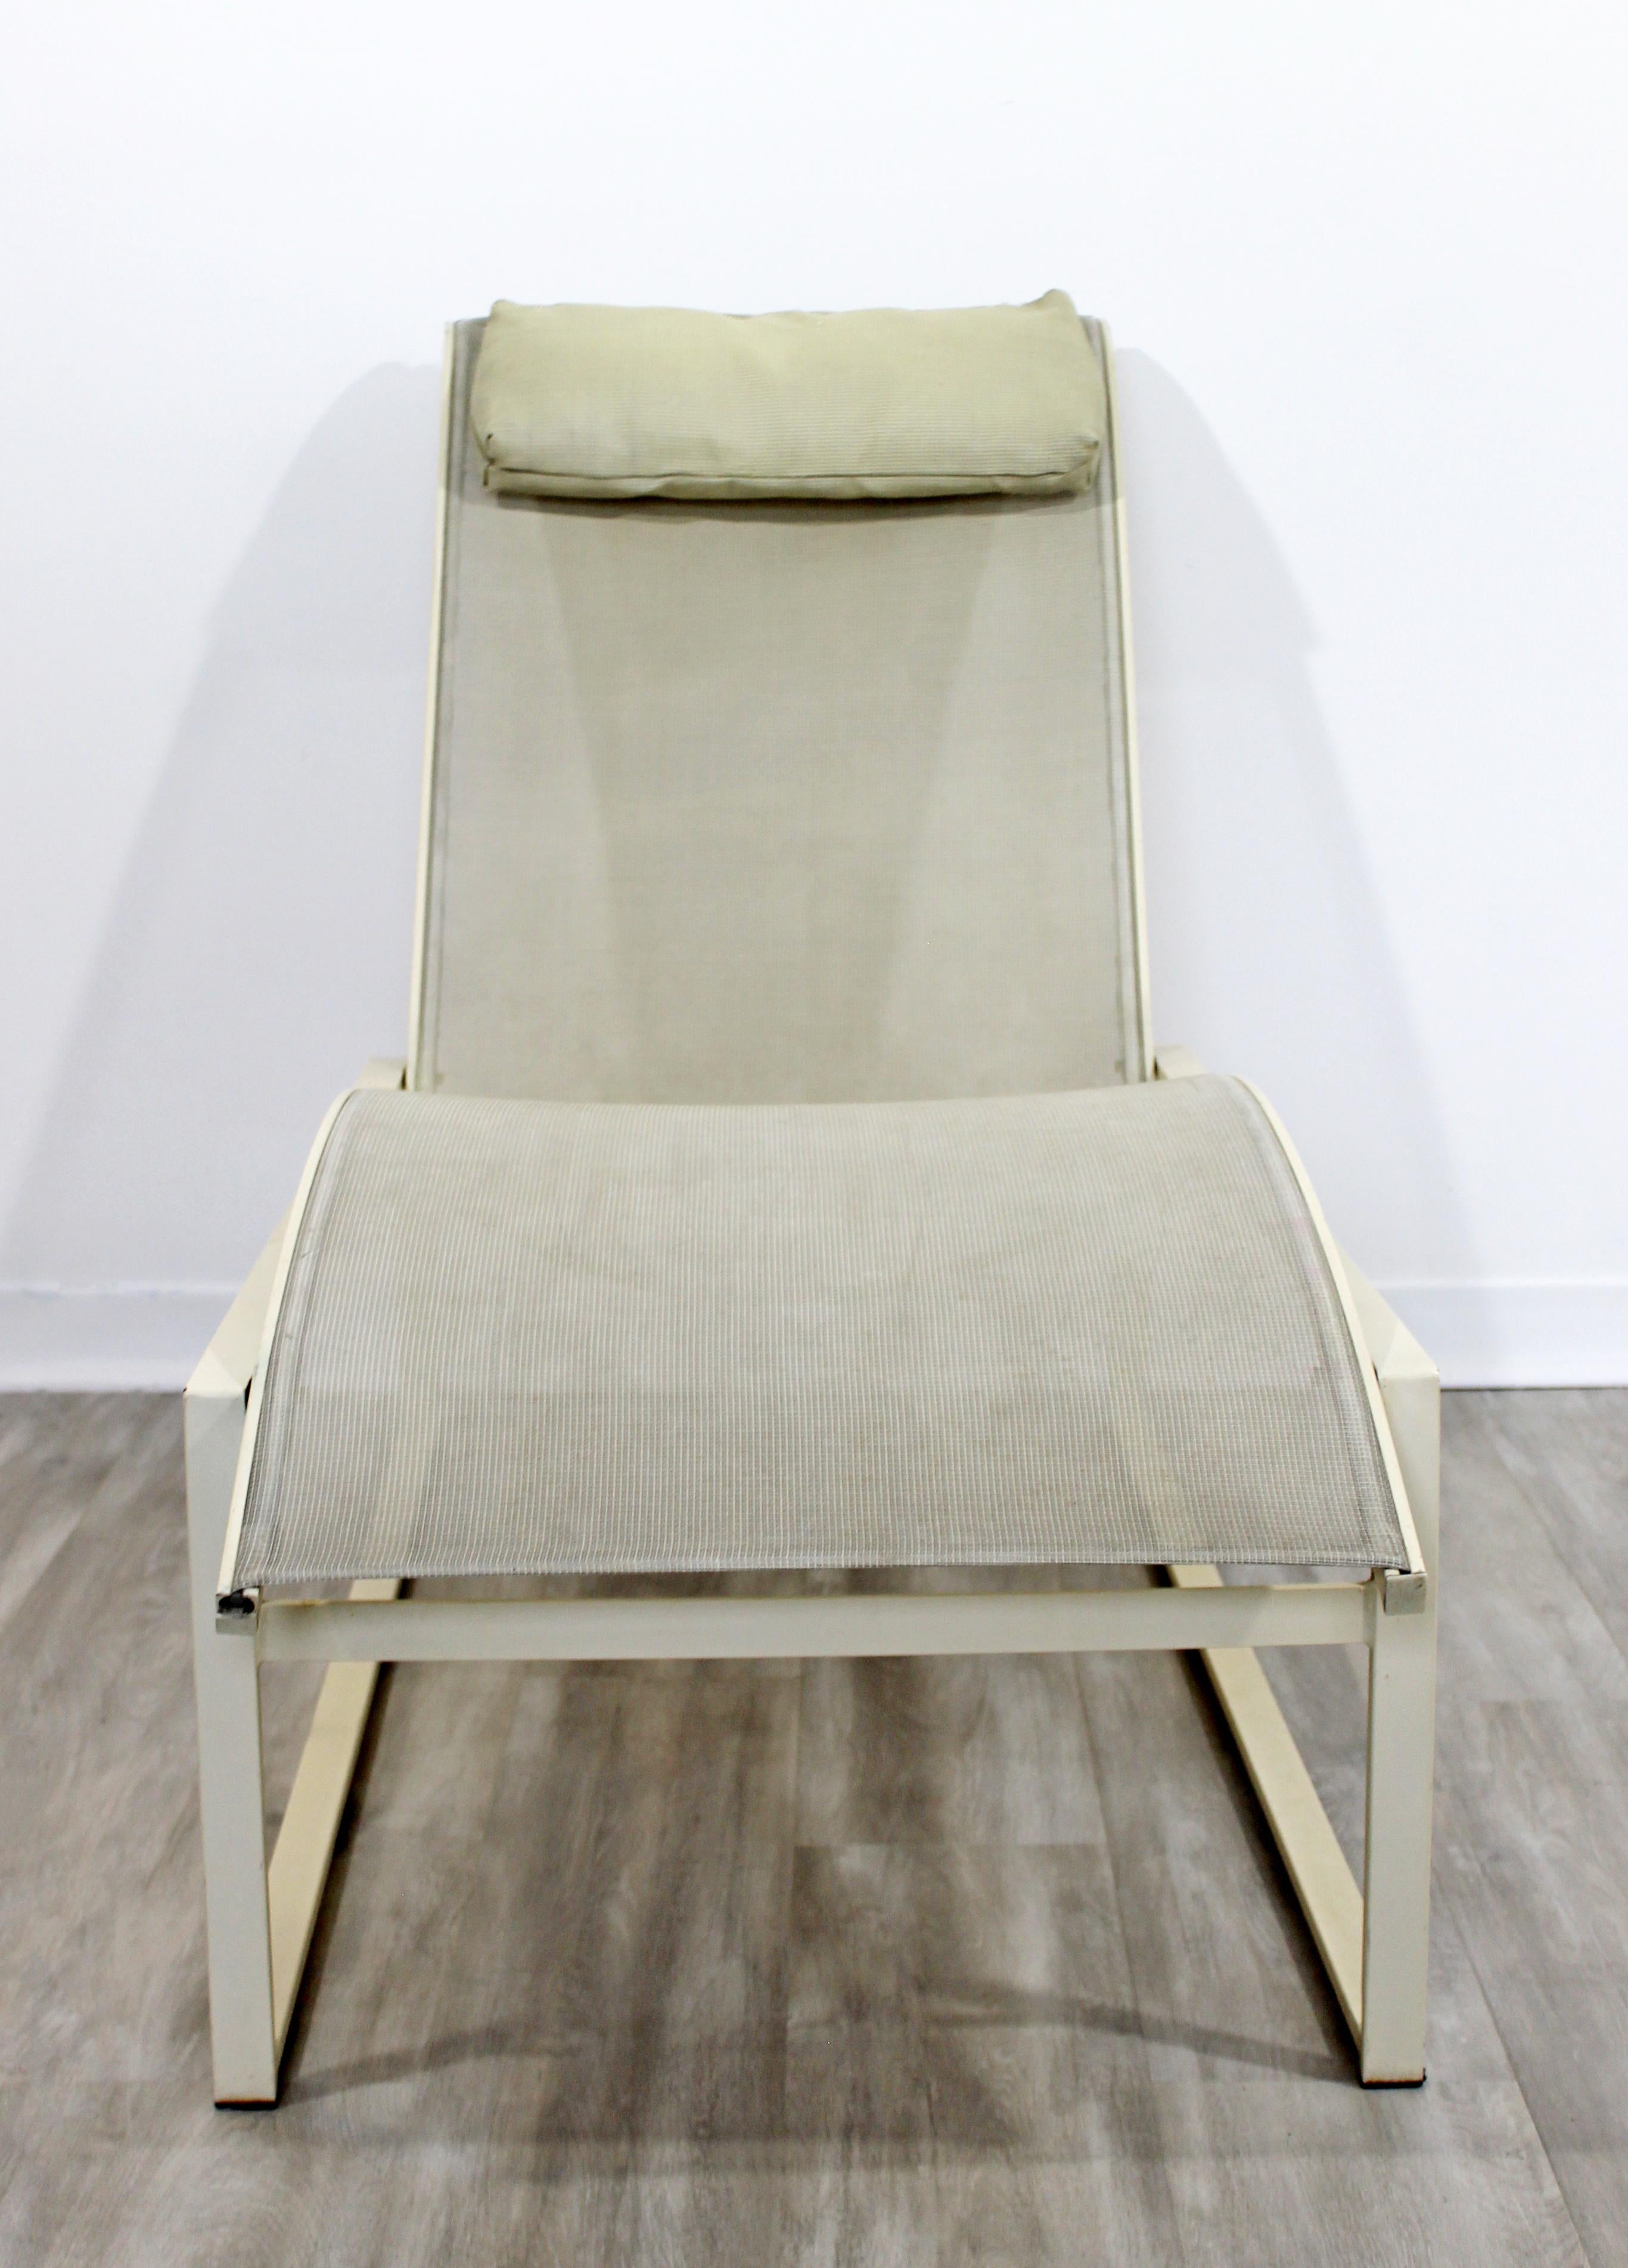 Late 20th Century Mid-Century Modern Pair of Woodard Margarita Patio Chaise Lounge Chairs & Table